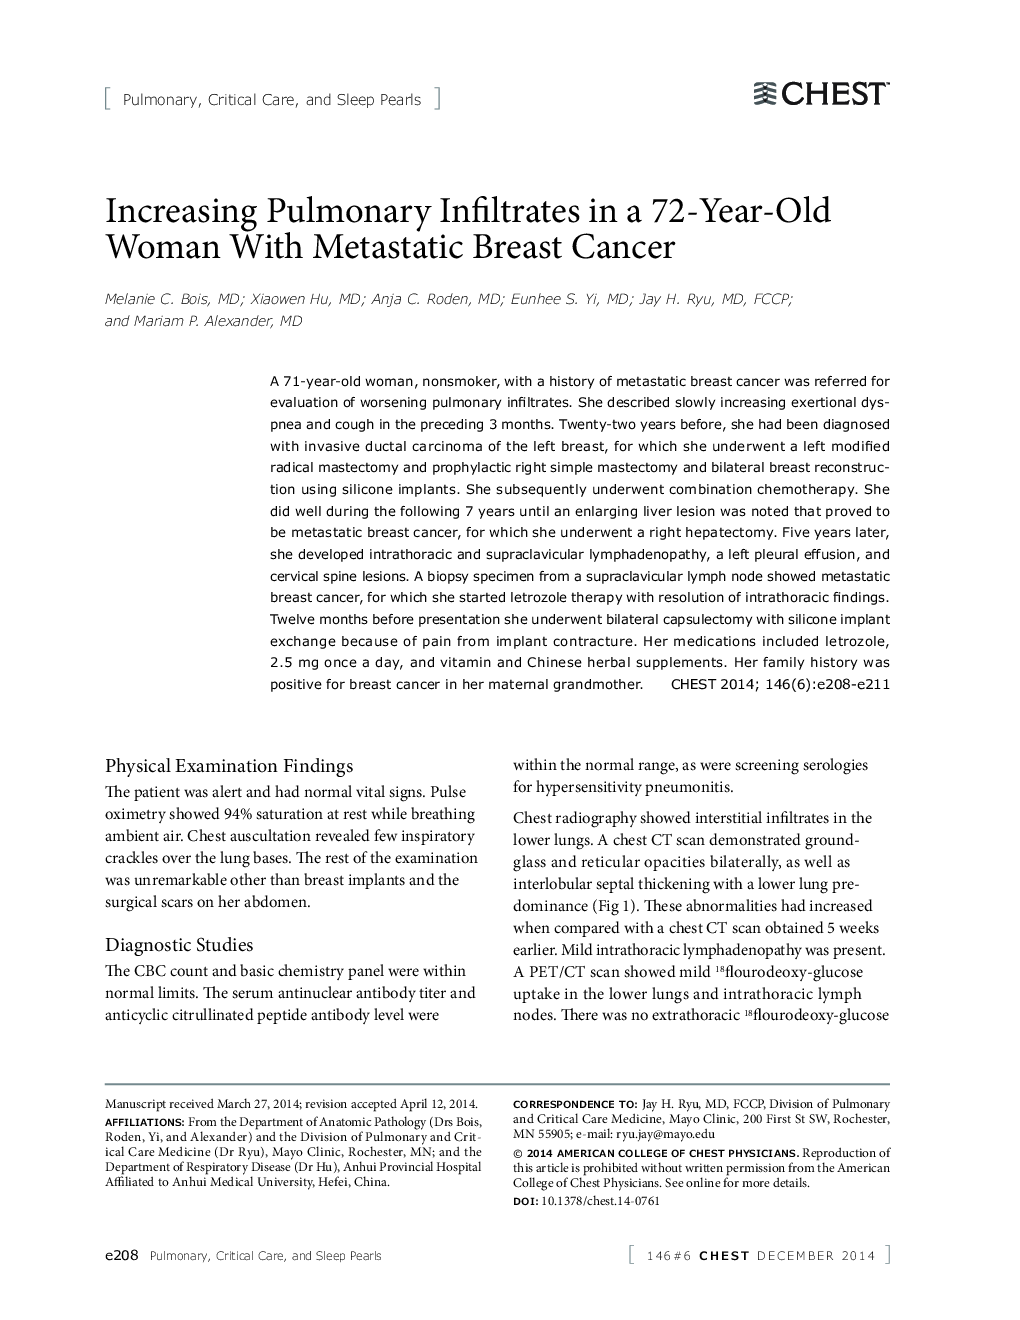 Increasing Pulmonary Infiltrates in a 72-Year-Old Woman With Metastatic Breast Cancer